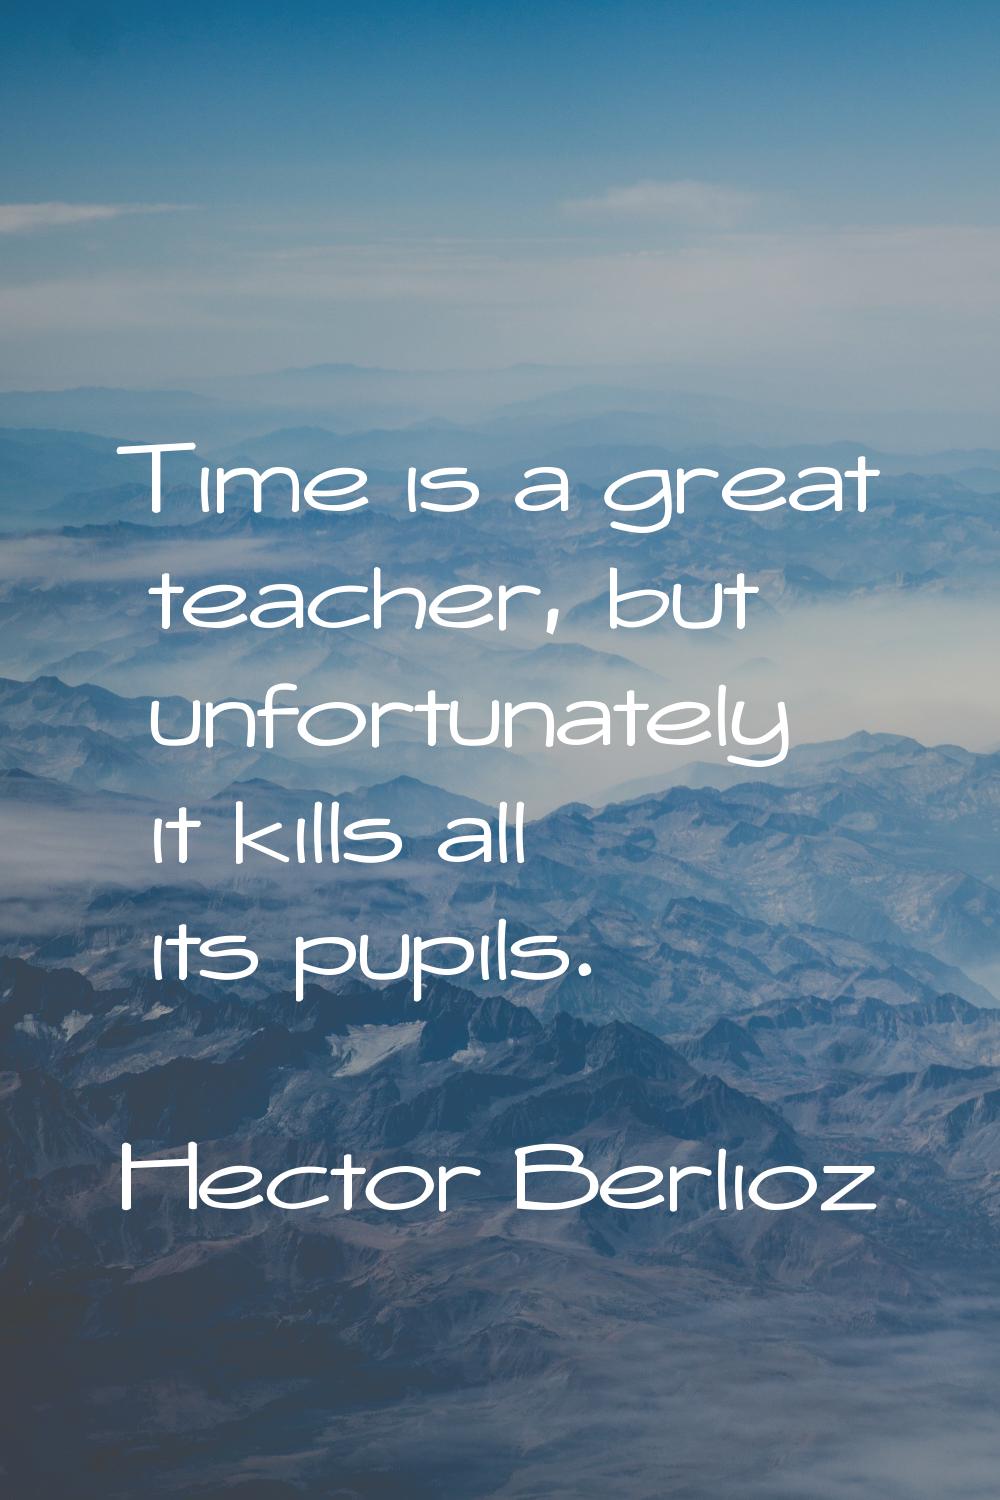 Time is a great teacher, but unfortunately it kills all its pupils.